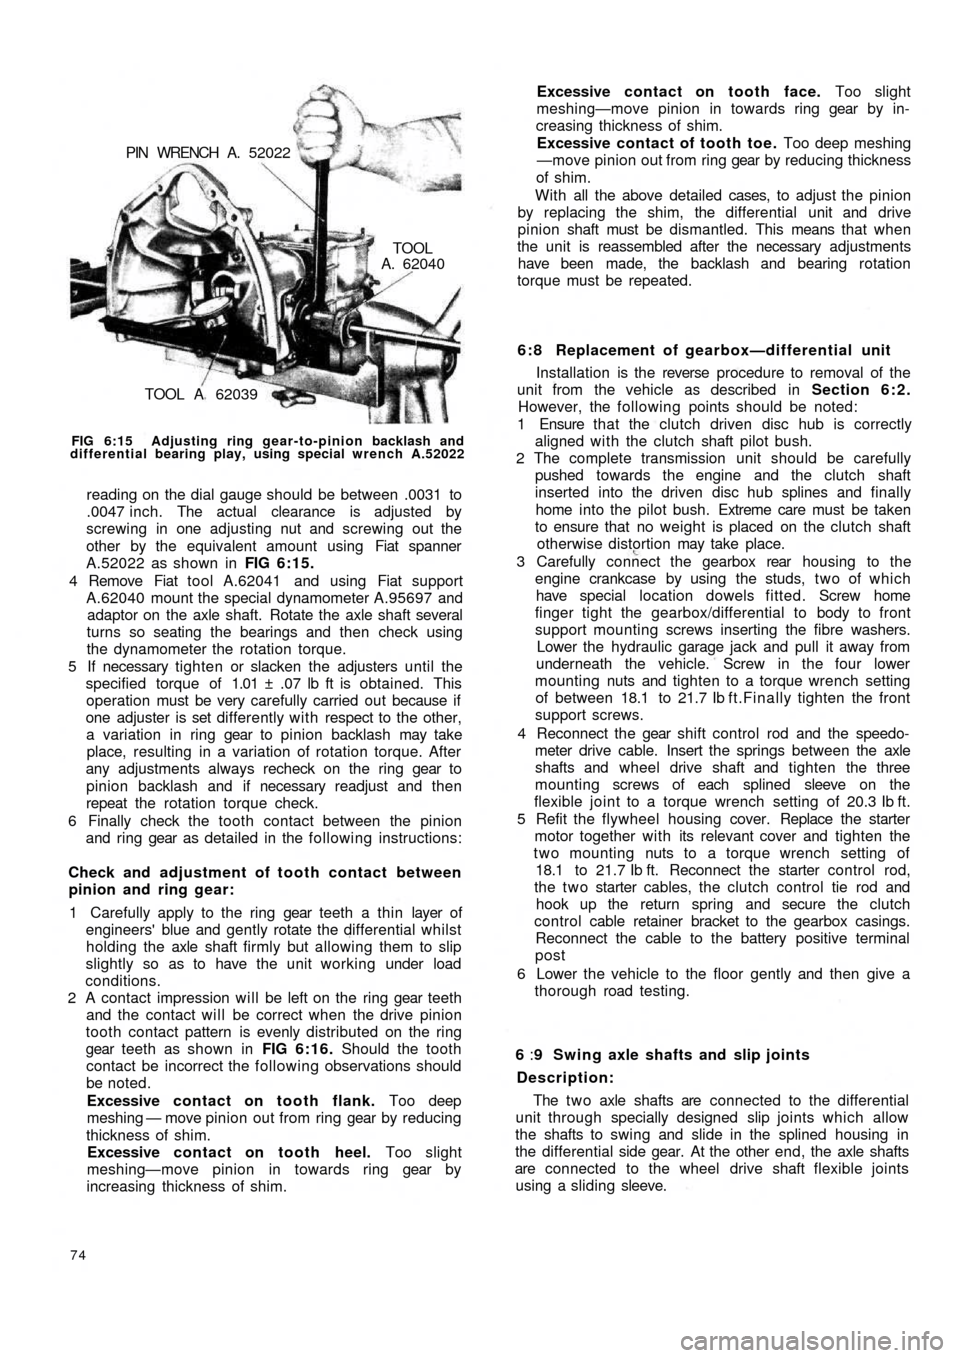 FIAT 500 1970 1.G Workshop Manual TOOL A  62039
TOOLA. 62040 PIN  WRENCH  A.  52022
FIG 6:15  Adjusting ring gear-to-pinion backlash and
differential bearing play, using special wrench A.52022
reading on the dial gauge should be betwe